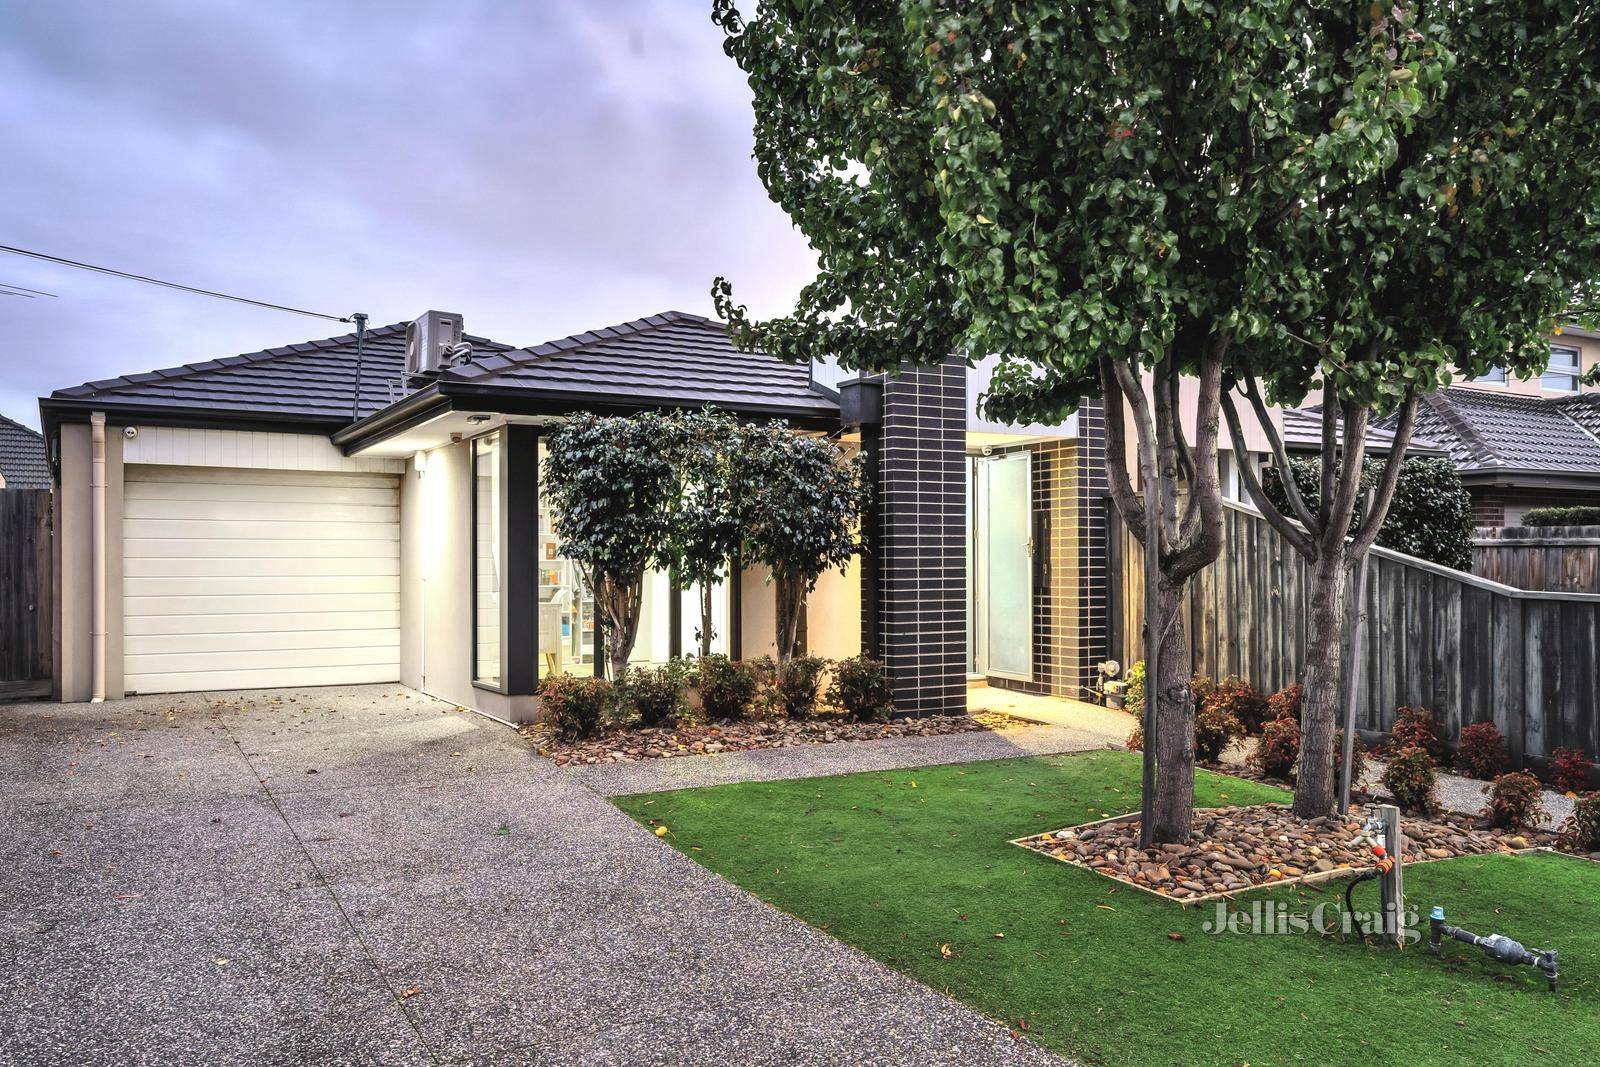 3 bedrooms House in 163 Parer Road AIRPORT WEST VIC, 3042